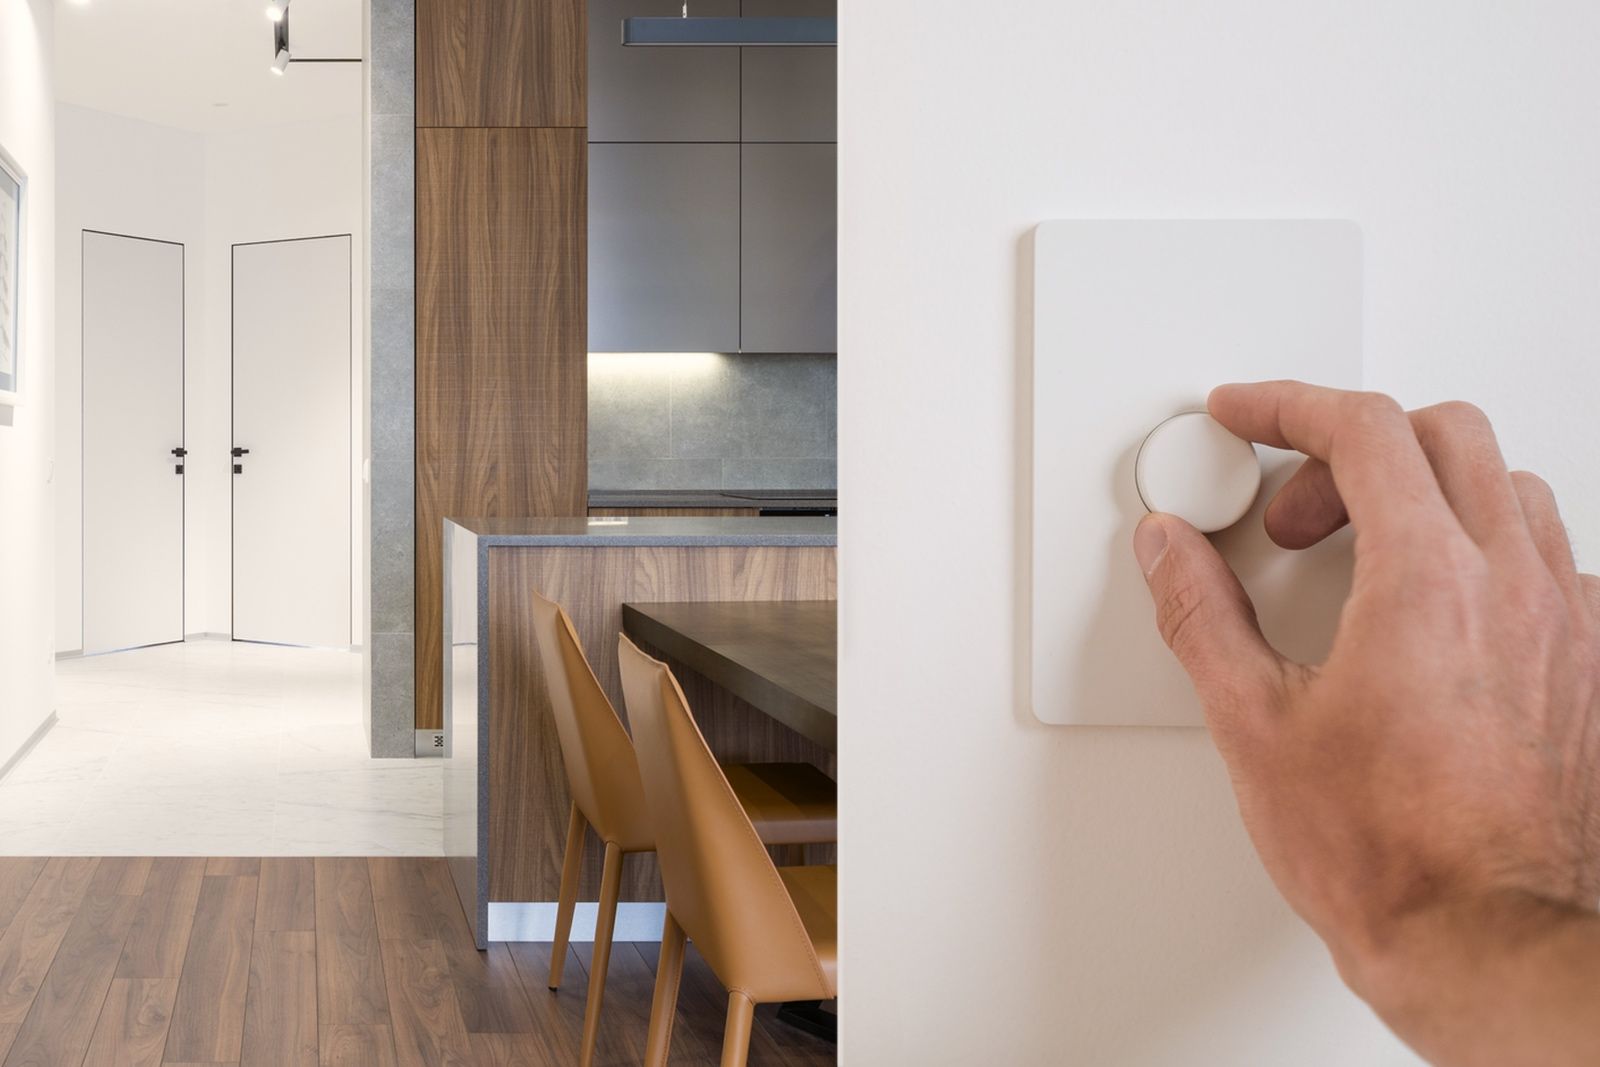 Nokia enters the smart home, launching smart light switches that help transform bulbs from regular to smart photo 2